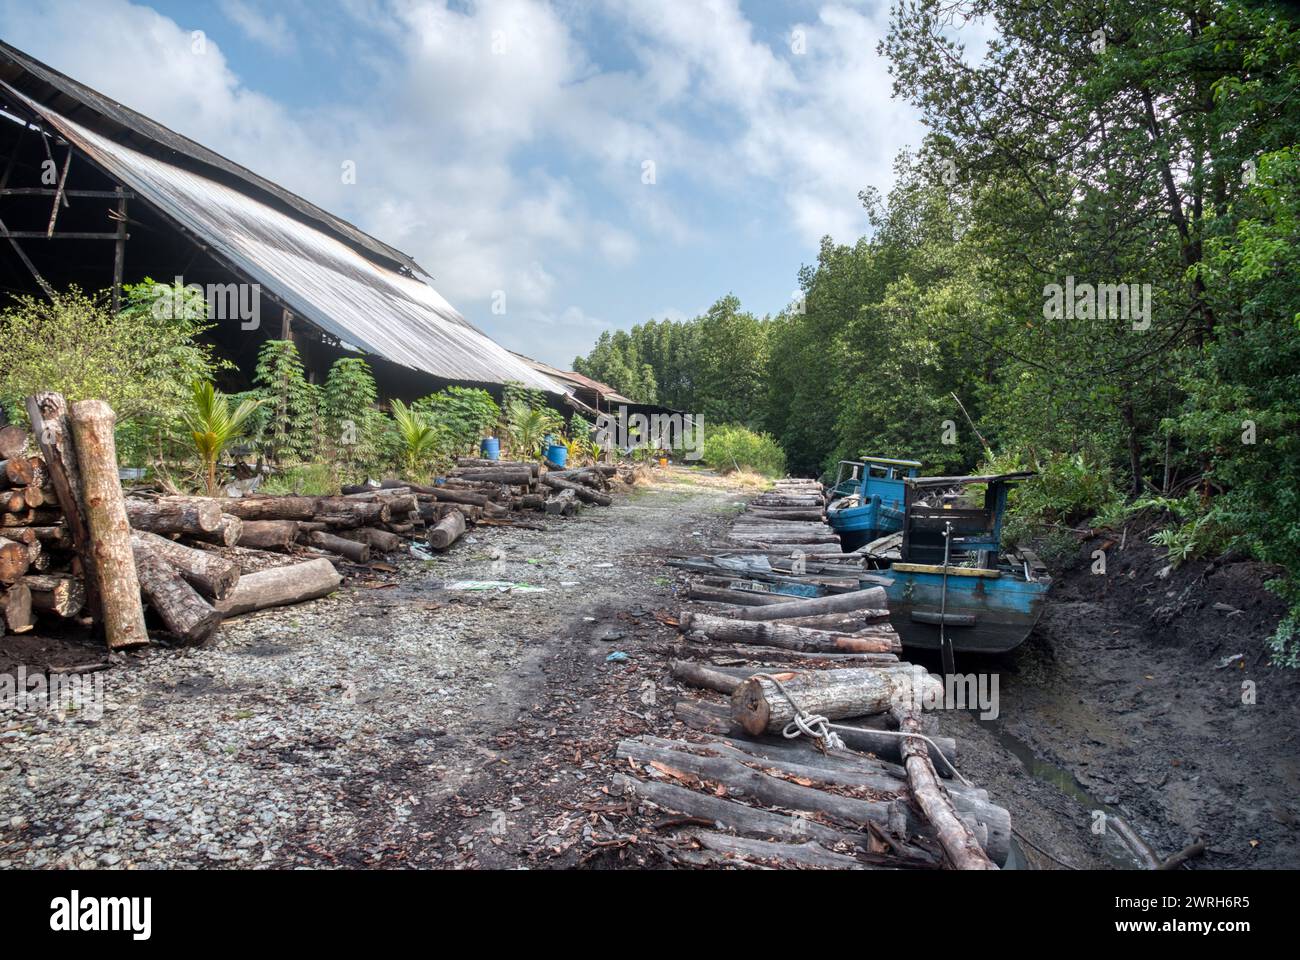 Scene of mangrove logs outside the charcoal factory shed. Stock Photo